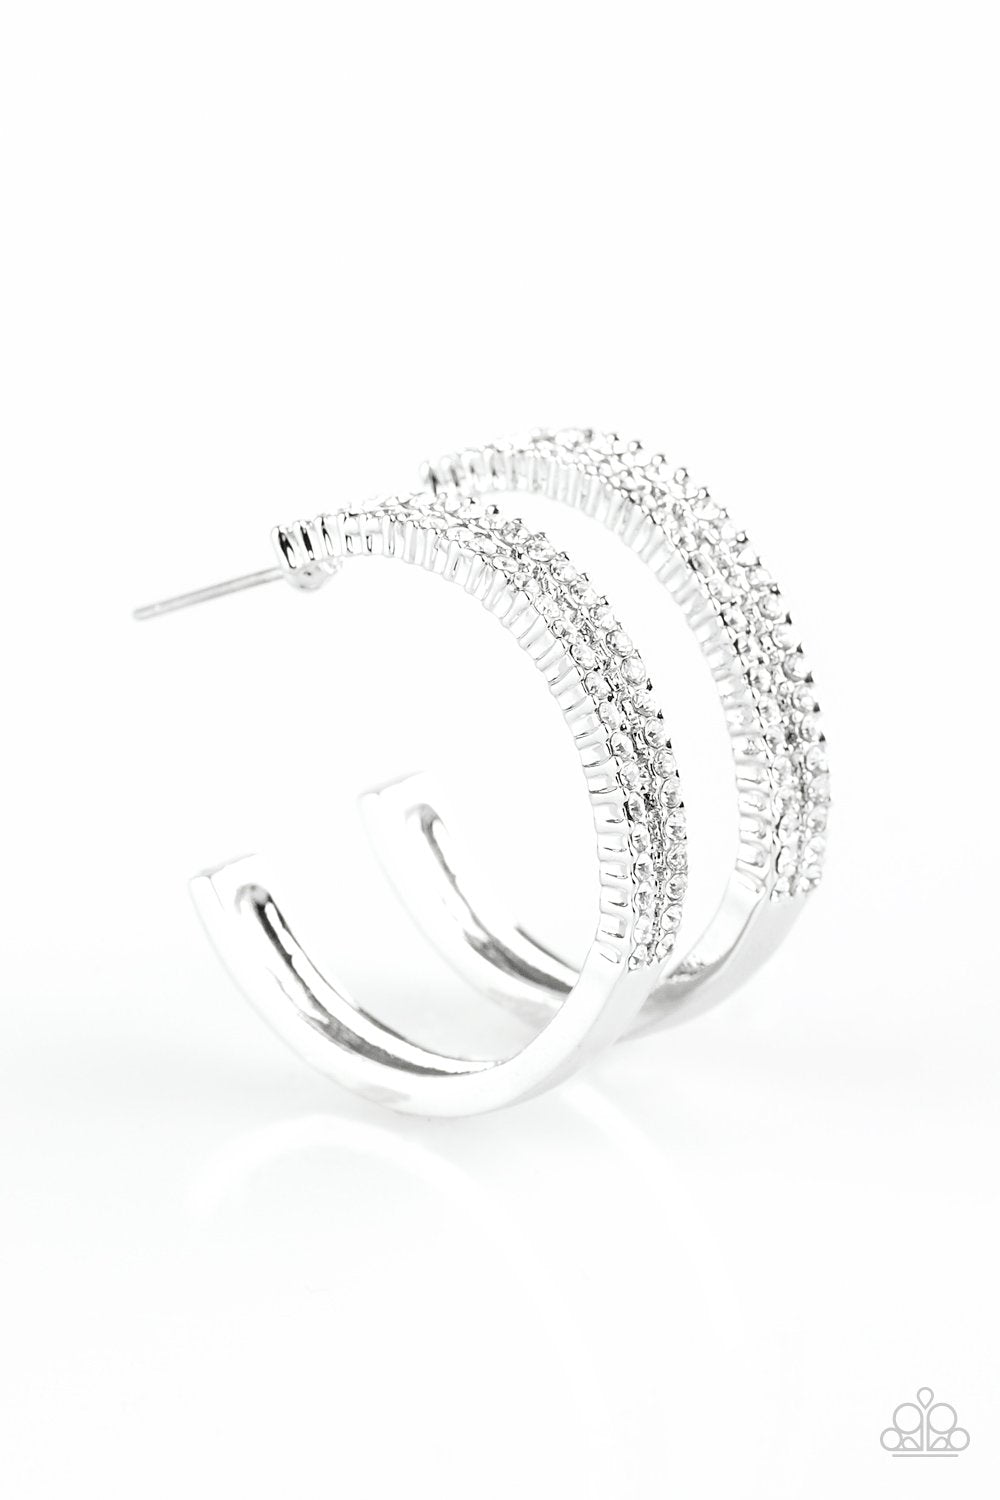 Slay Your Way White Rhinestone Hoop Earrings - Paparazzi Accessories-CarasShop.com - $5 Jewelry by Cara Jewels